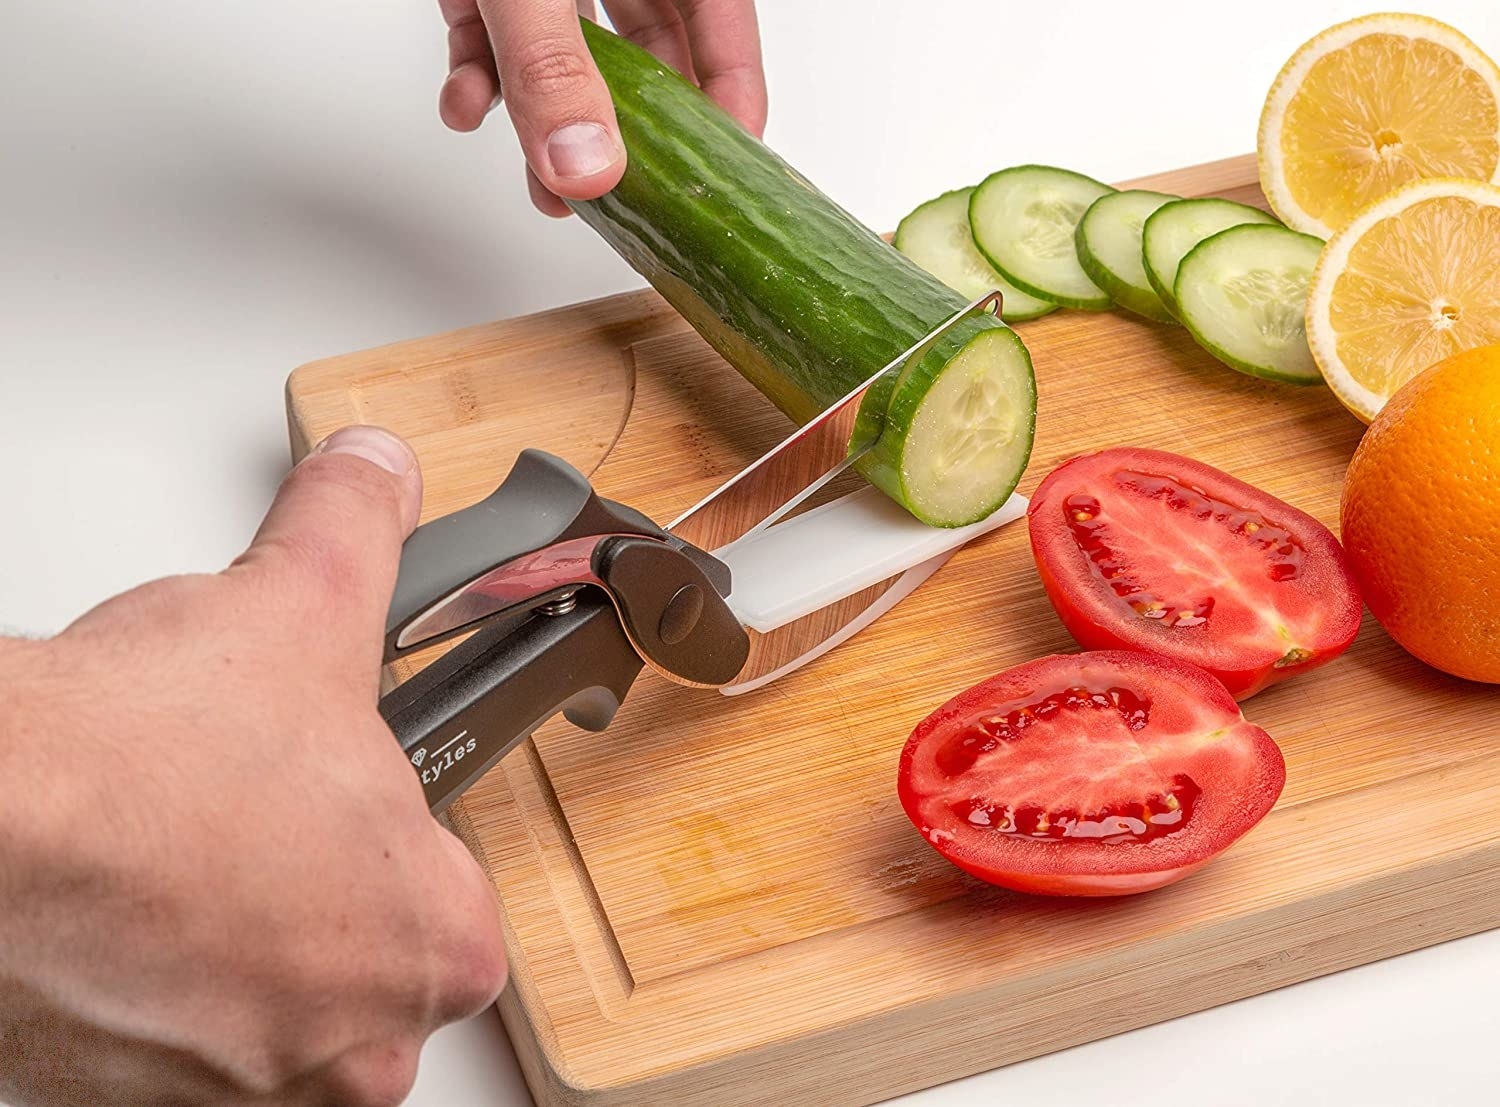 the half knife, half scissor tool being used to cut a cucumber